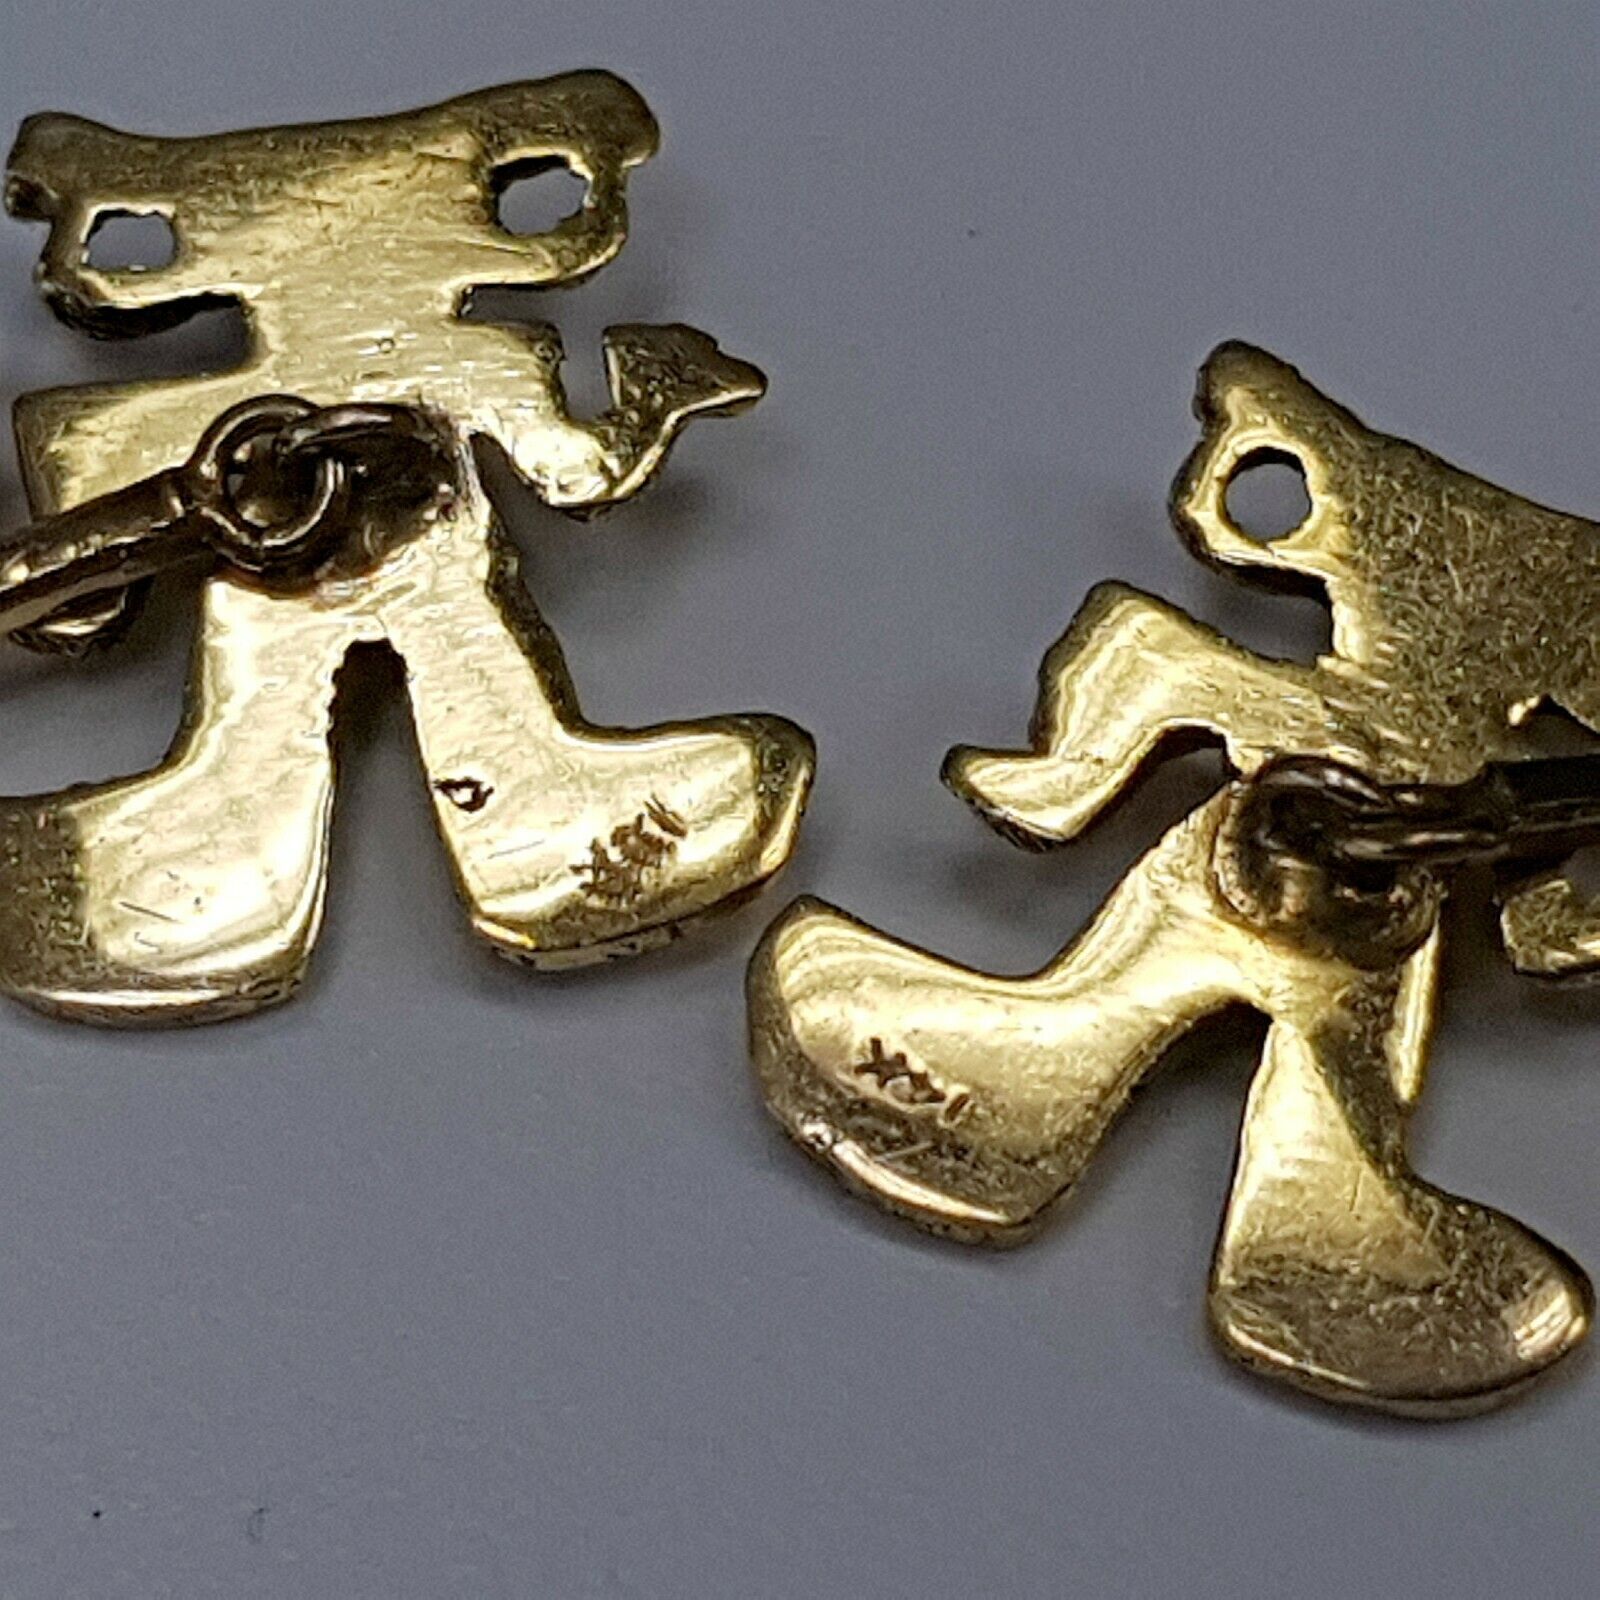 Vintage Collectible 14K GOLD MICKEY MOUSE CUFF LINKS